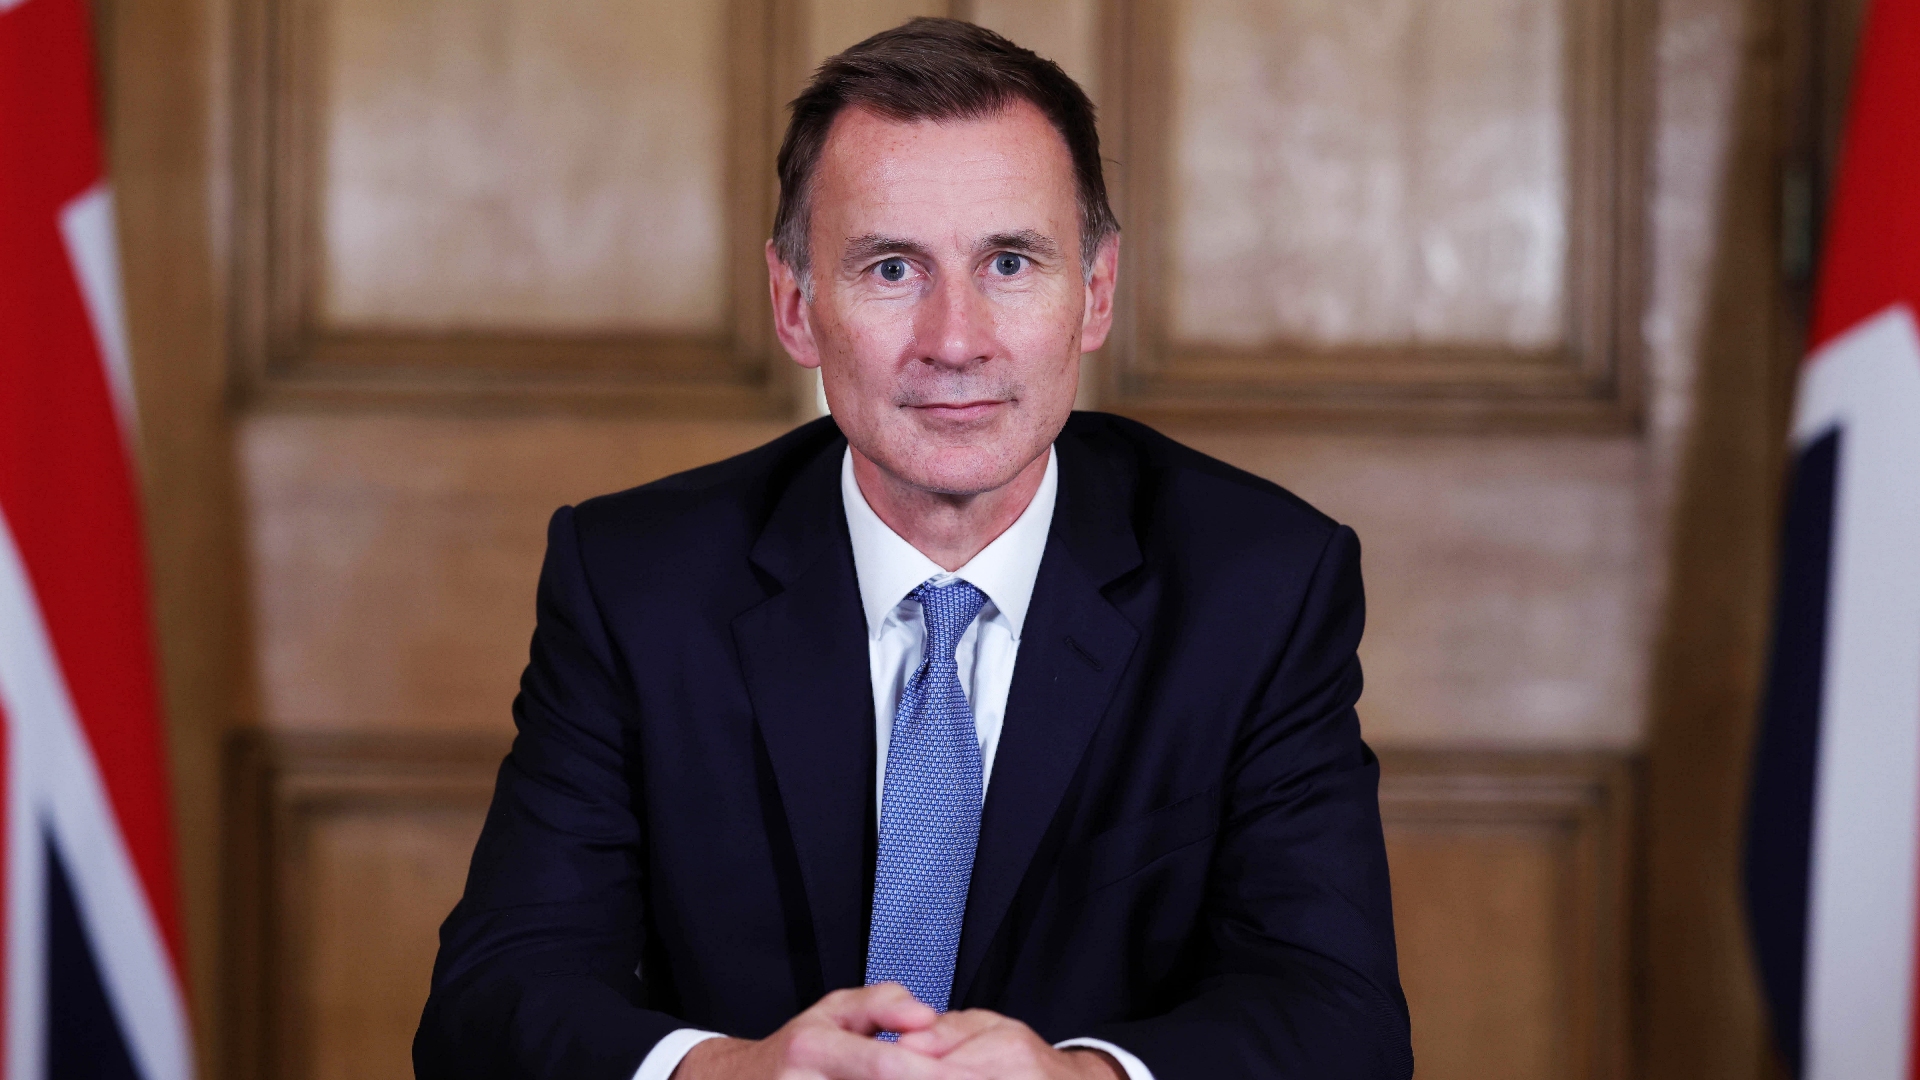 Jeremy Hunt is expected to make the funding announcement during Wednesday's budget.